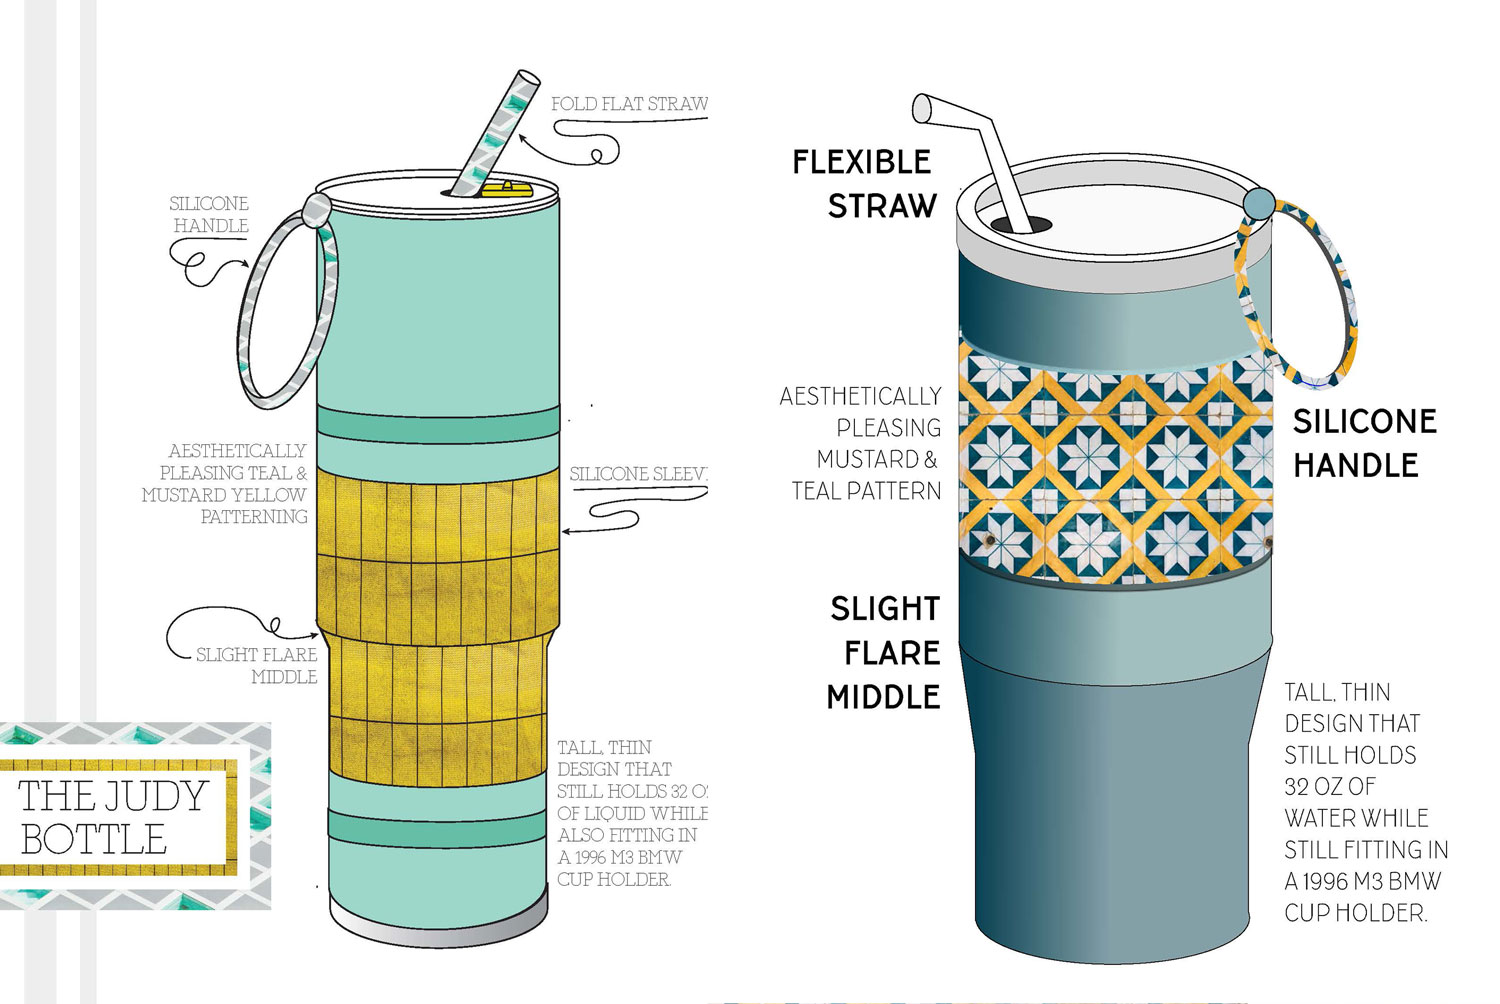 Introduction to design project, design a water bottle image